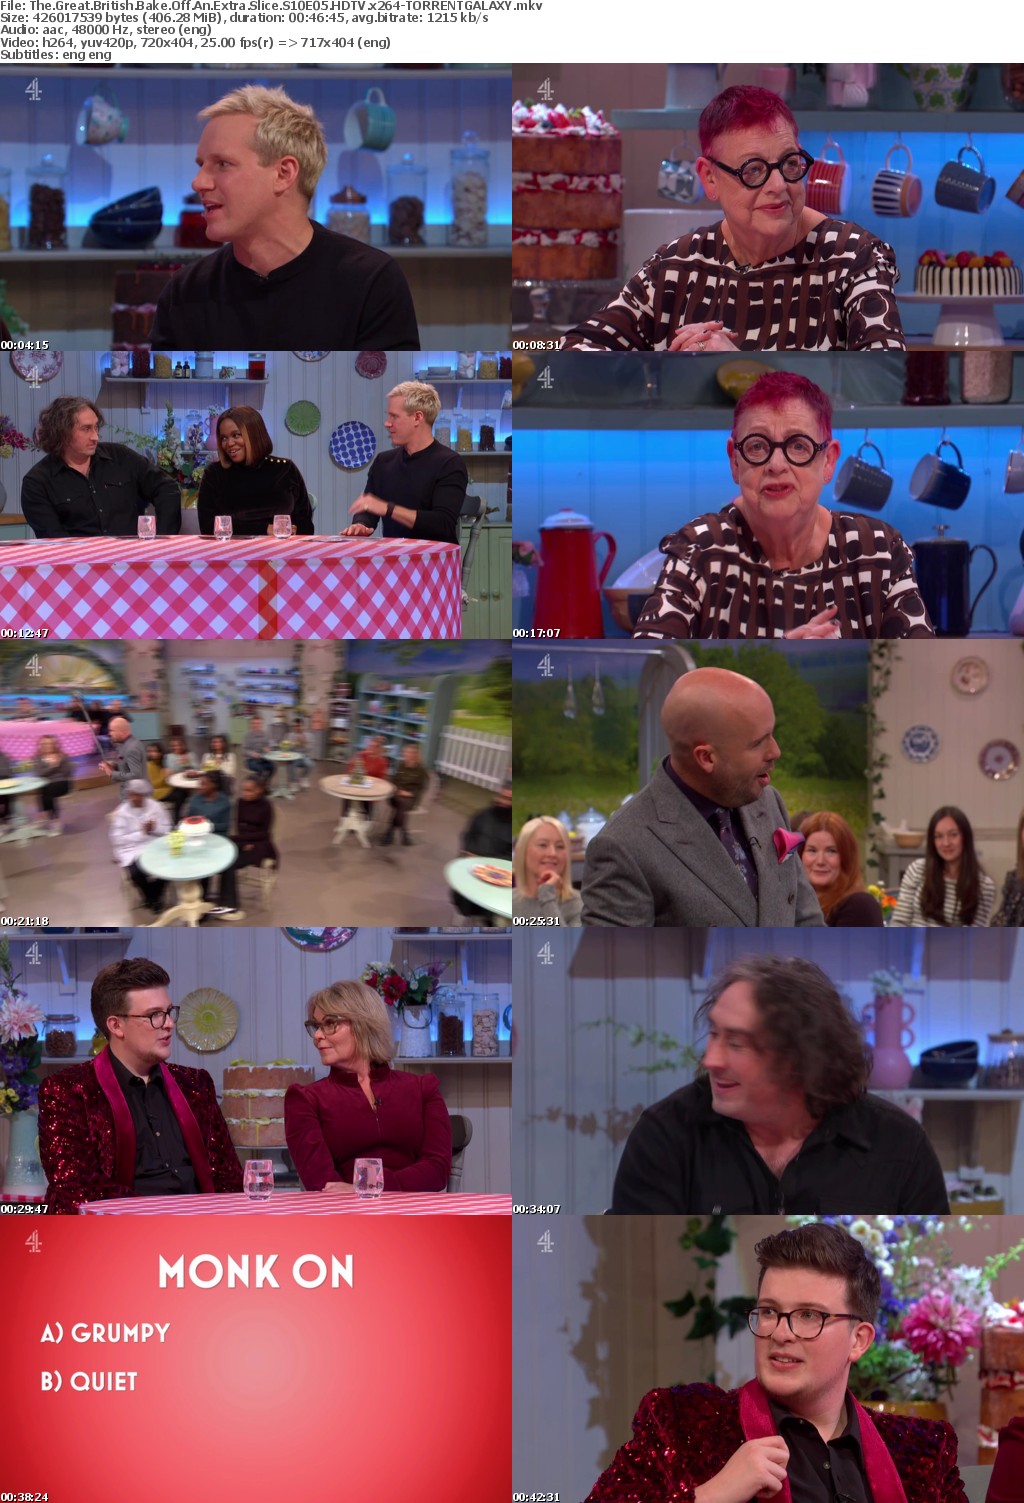 The Great British Bake Off An Extra Slice S10E05 HDTV x264-GALAXY